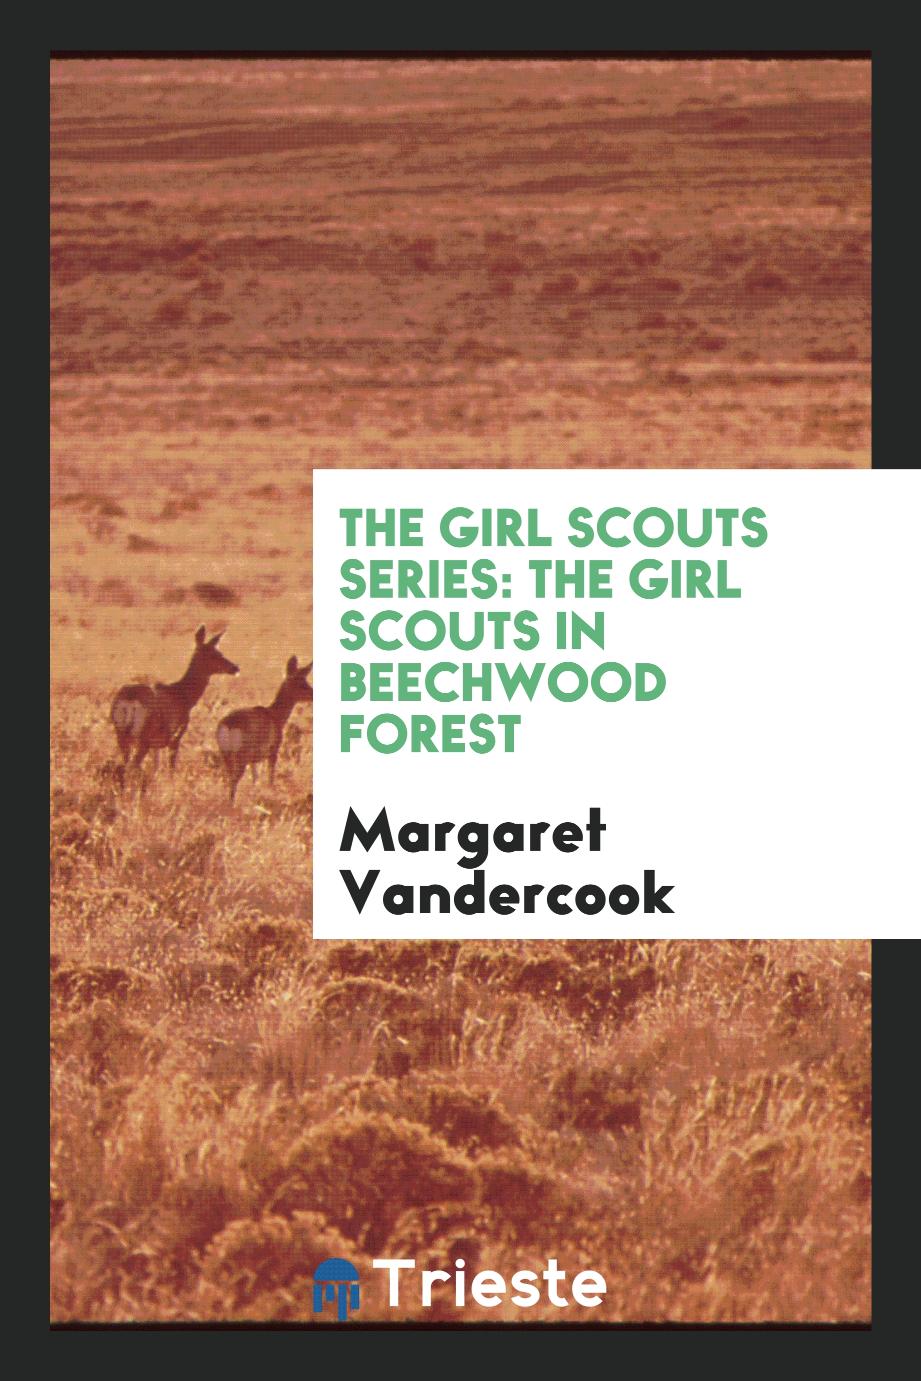 The Girl Scouts Series: The Girl Scouts in Beechwood Forest